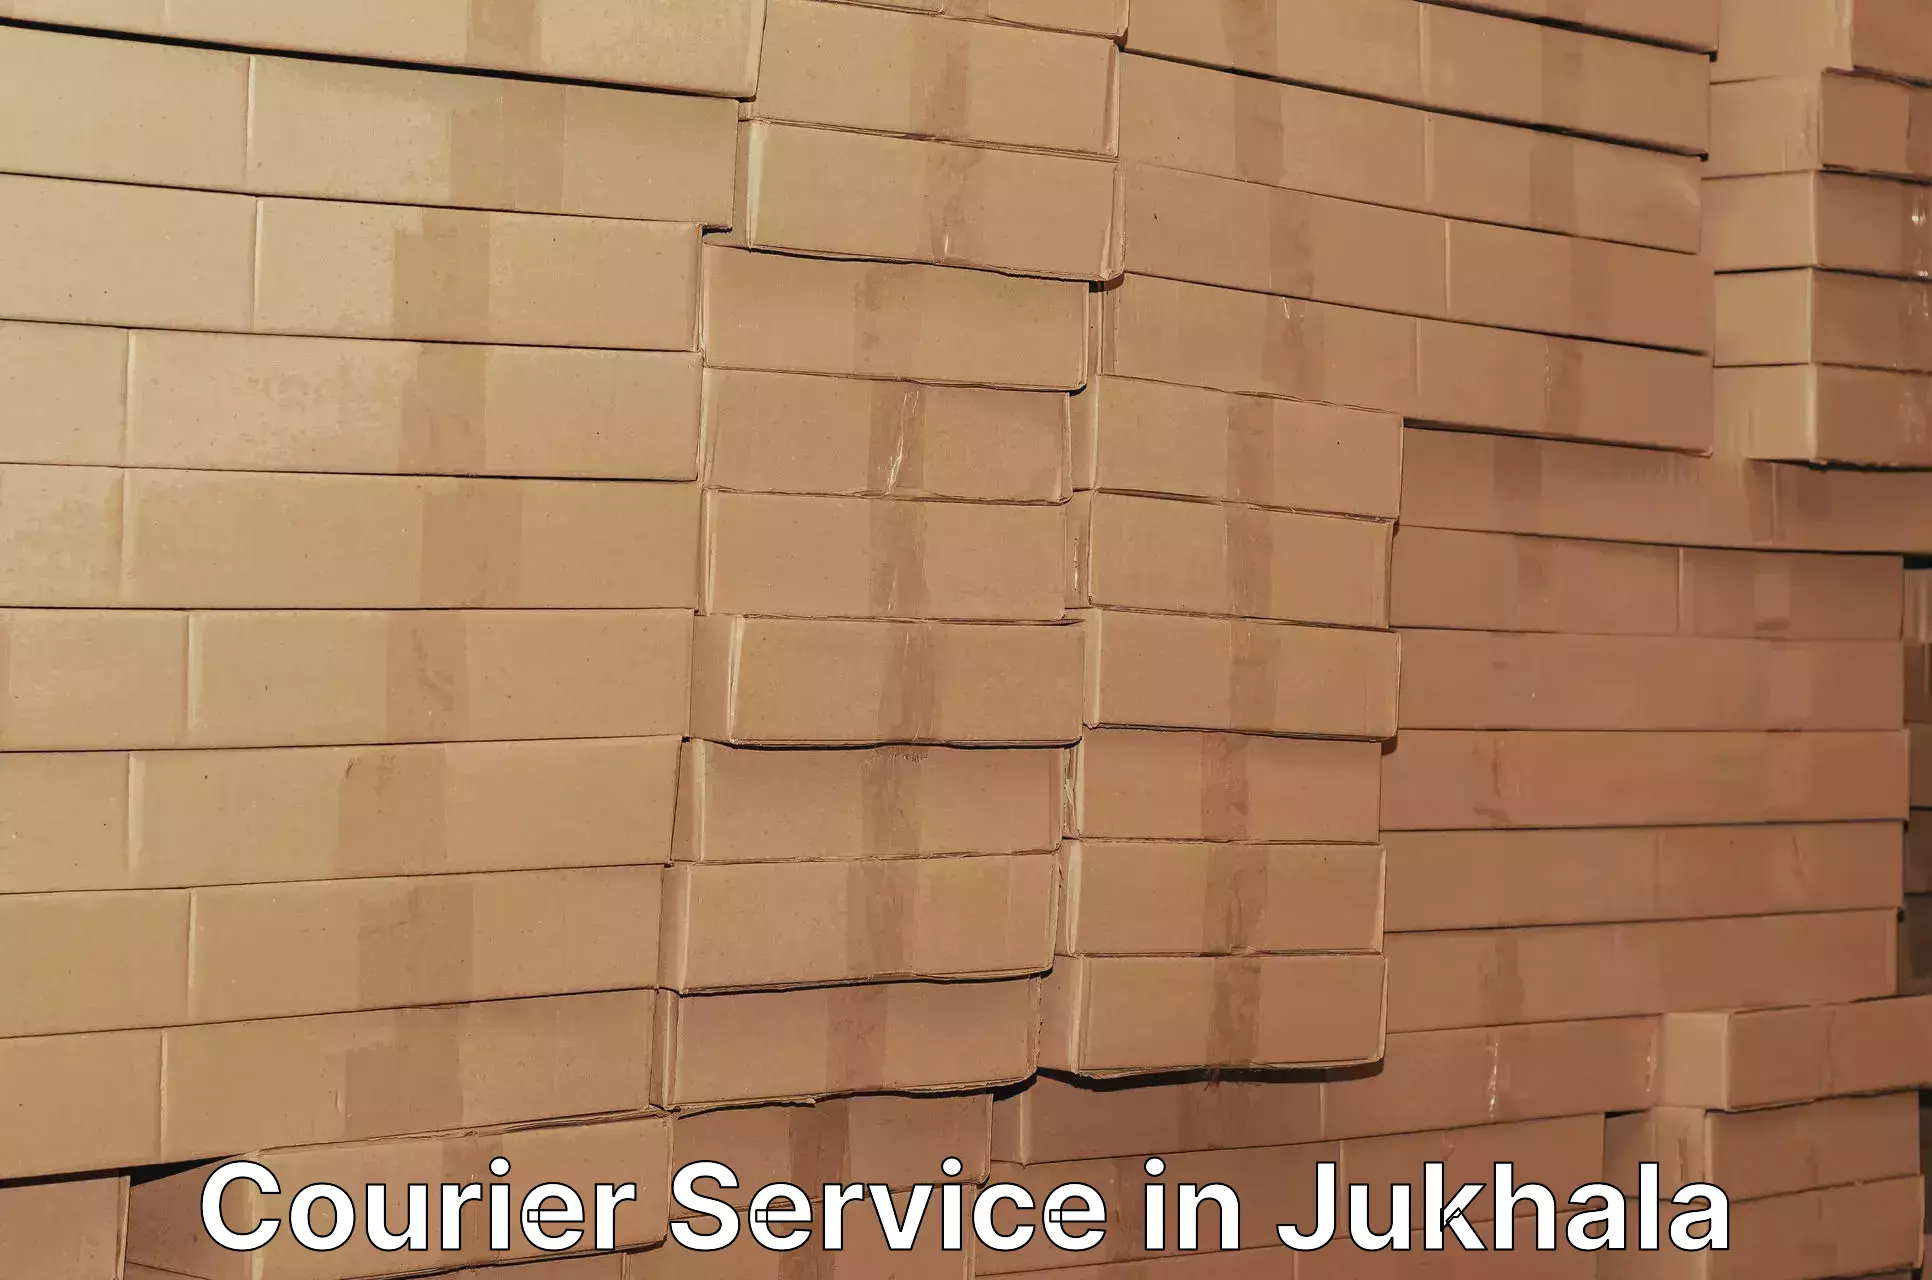 Diverse delivery methods in Jukhala